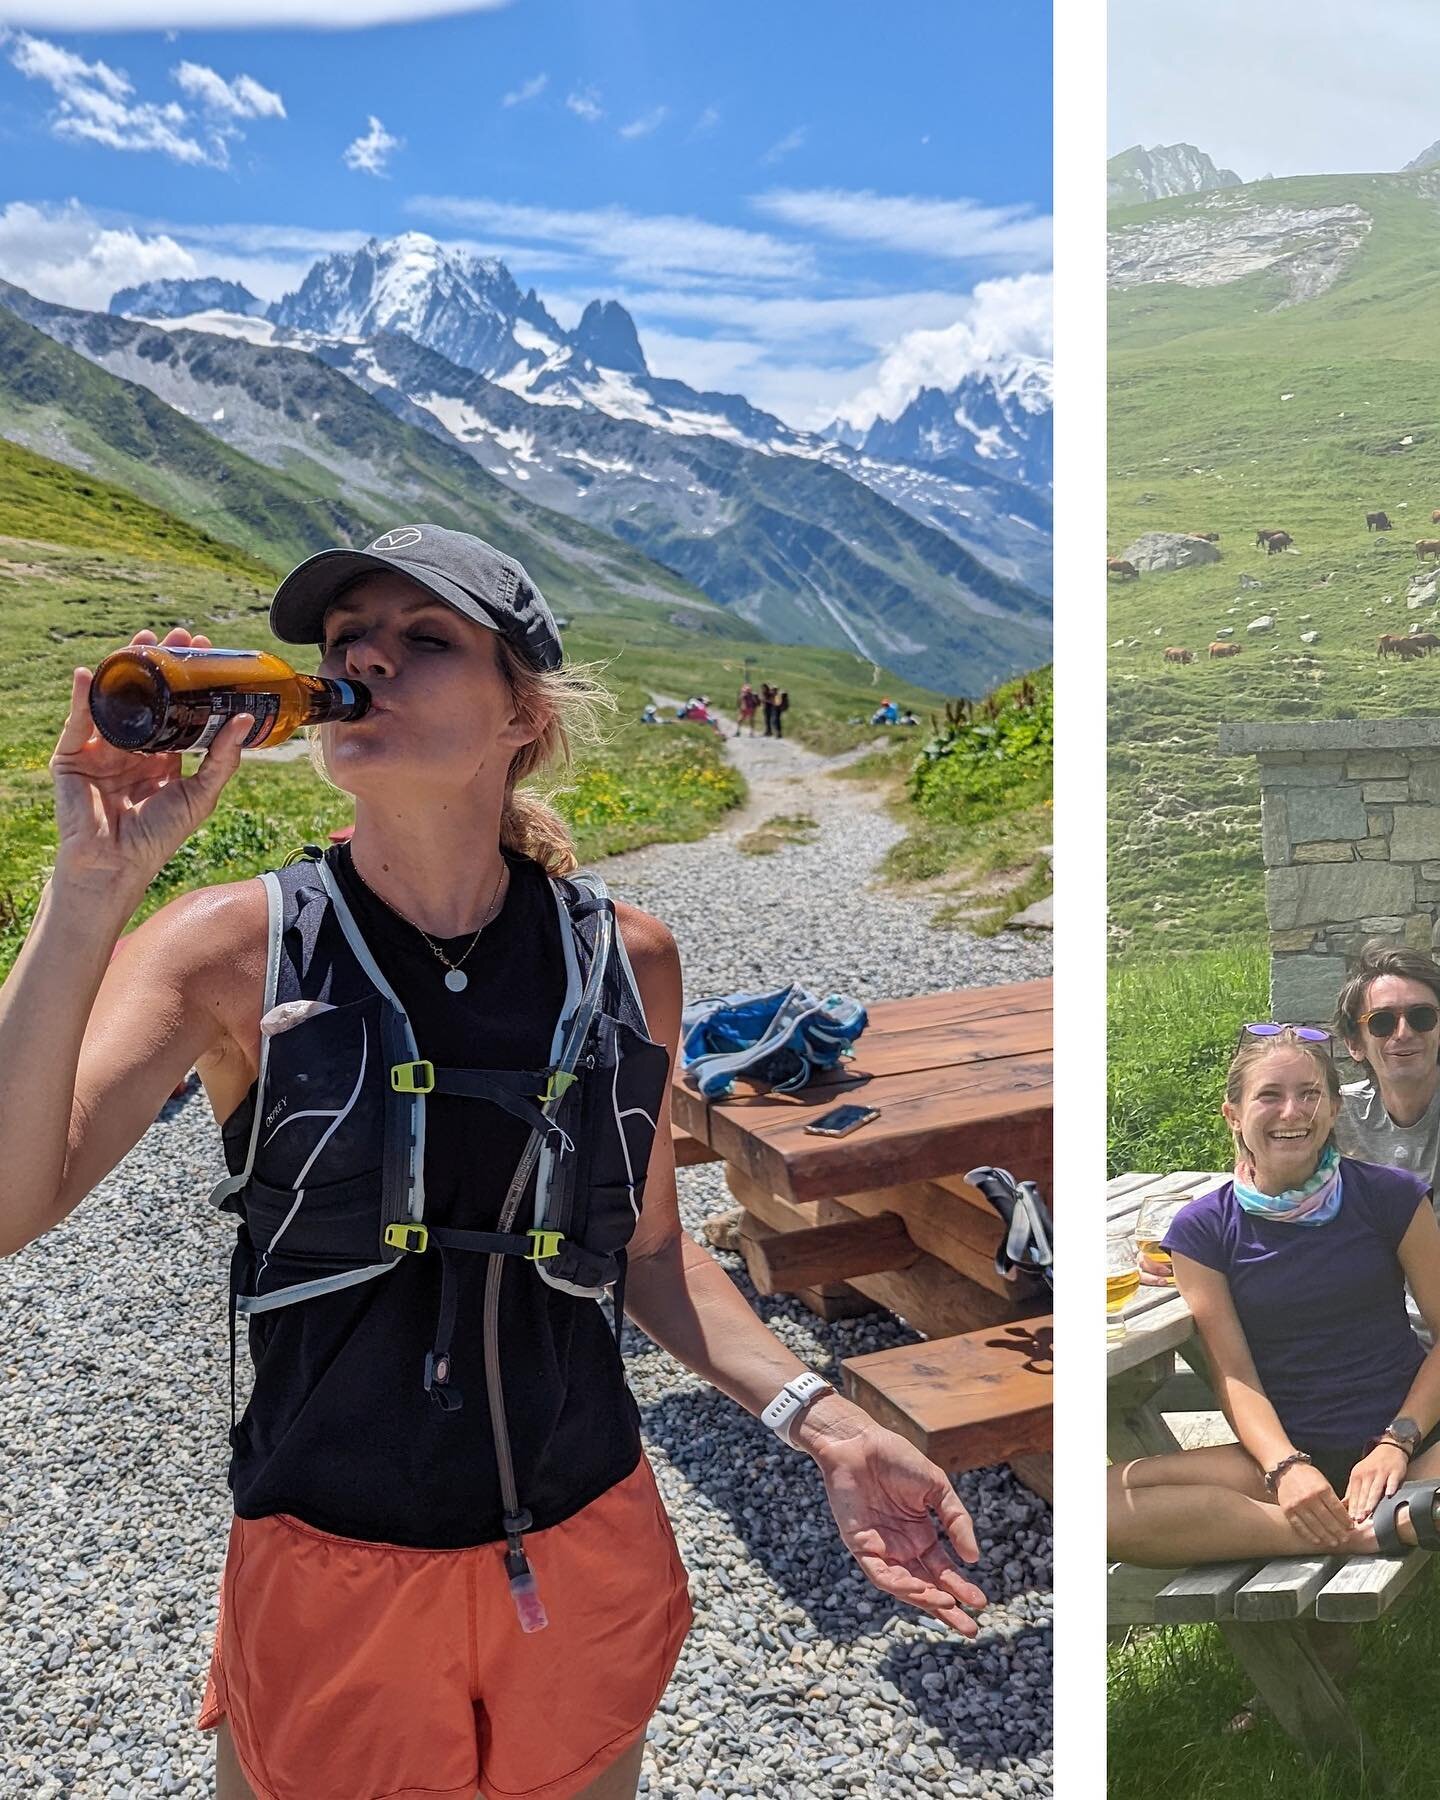 What&rsquo;s your favorite mid-run snack? We still can&rsquo;t decide on the Tour du Mont Blanc. 🥐 🍺 ☕️ 🍕 Join us July 7-15 and we&rsquo;ll show you our favorite stops along the way as we run (and snack) through France, Italy, and Switzerland. 

L